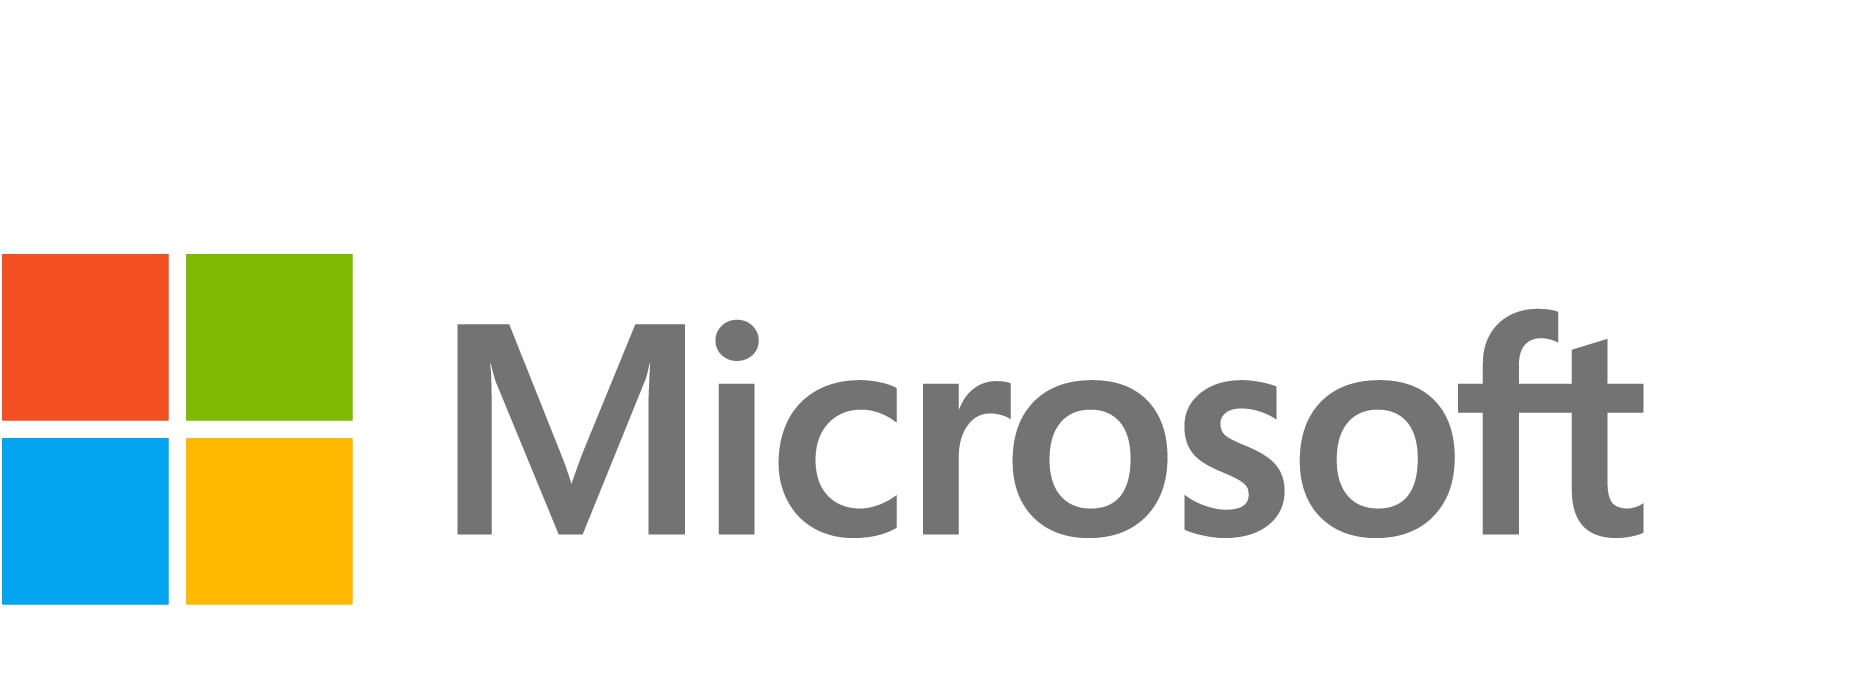 Microsoft Power Automate PURPA - subscription license - 1 user